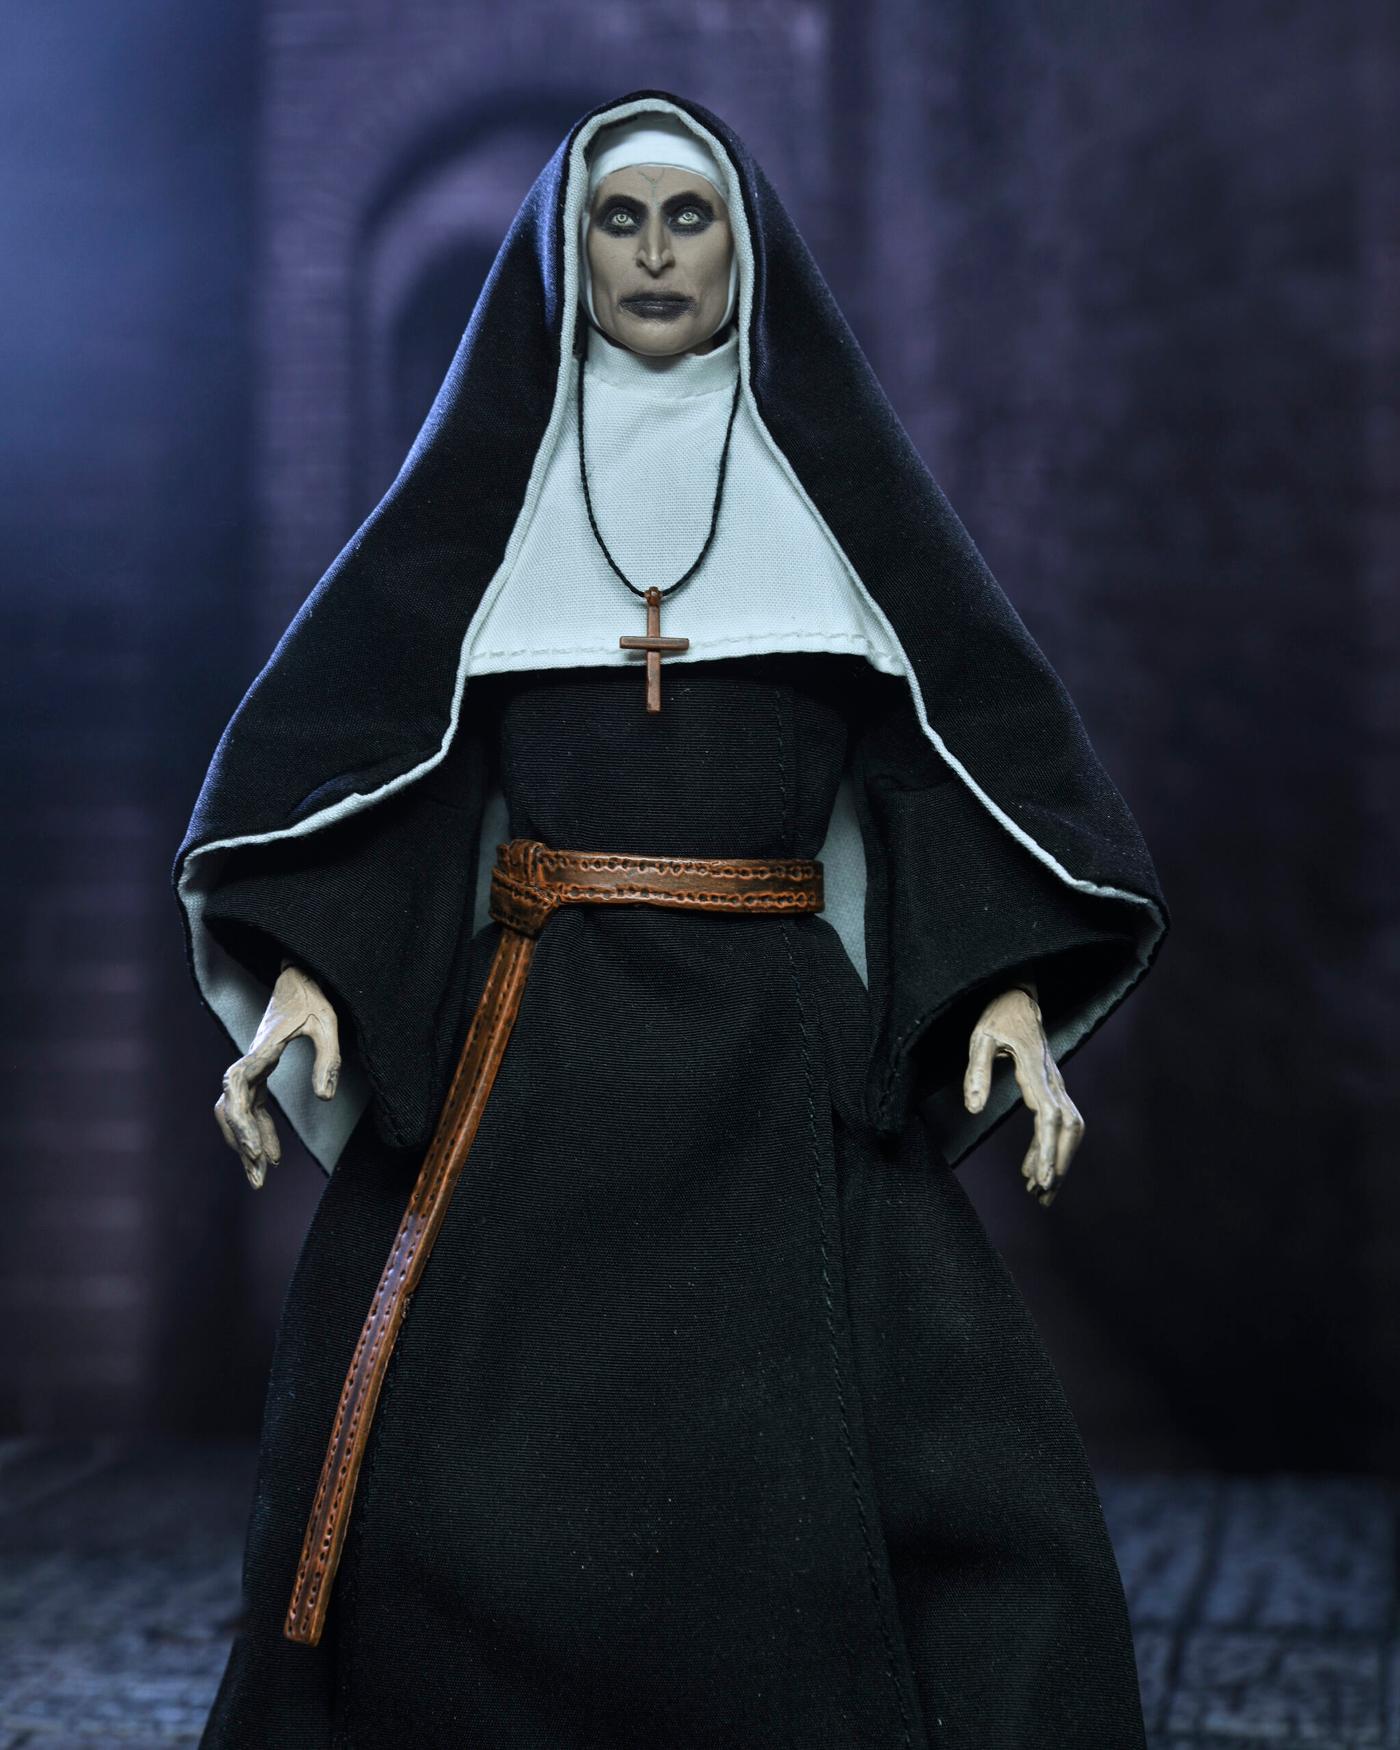 7” Scale Action Figure – Ultimate Valak (The Nun) from THE CONJURING UNIVERSE.